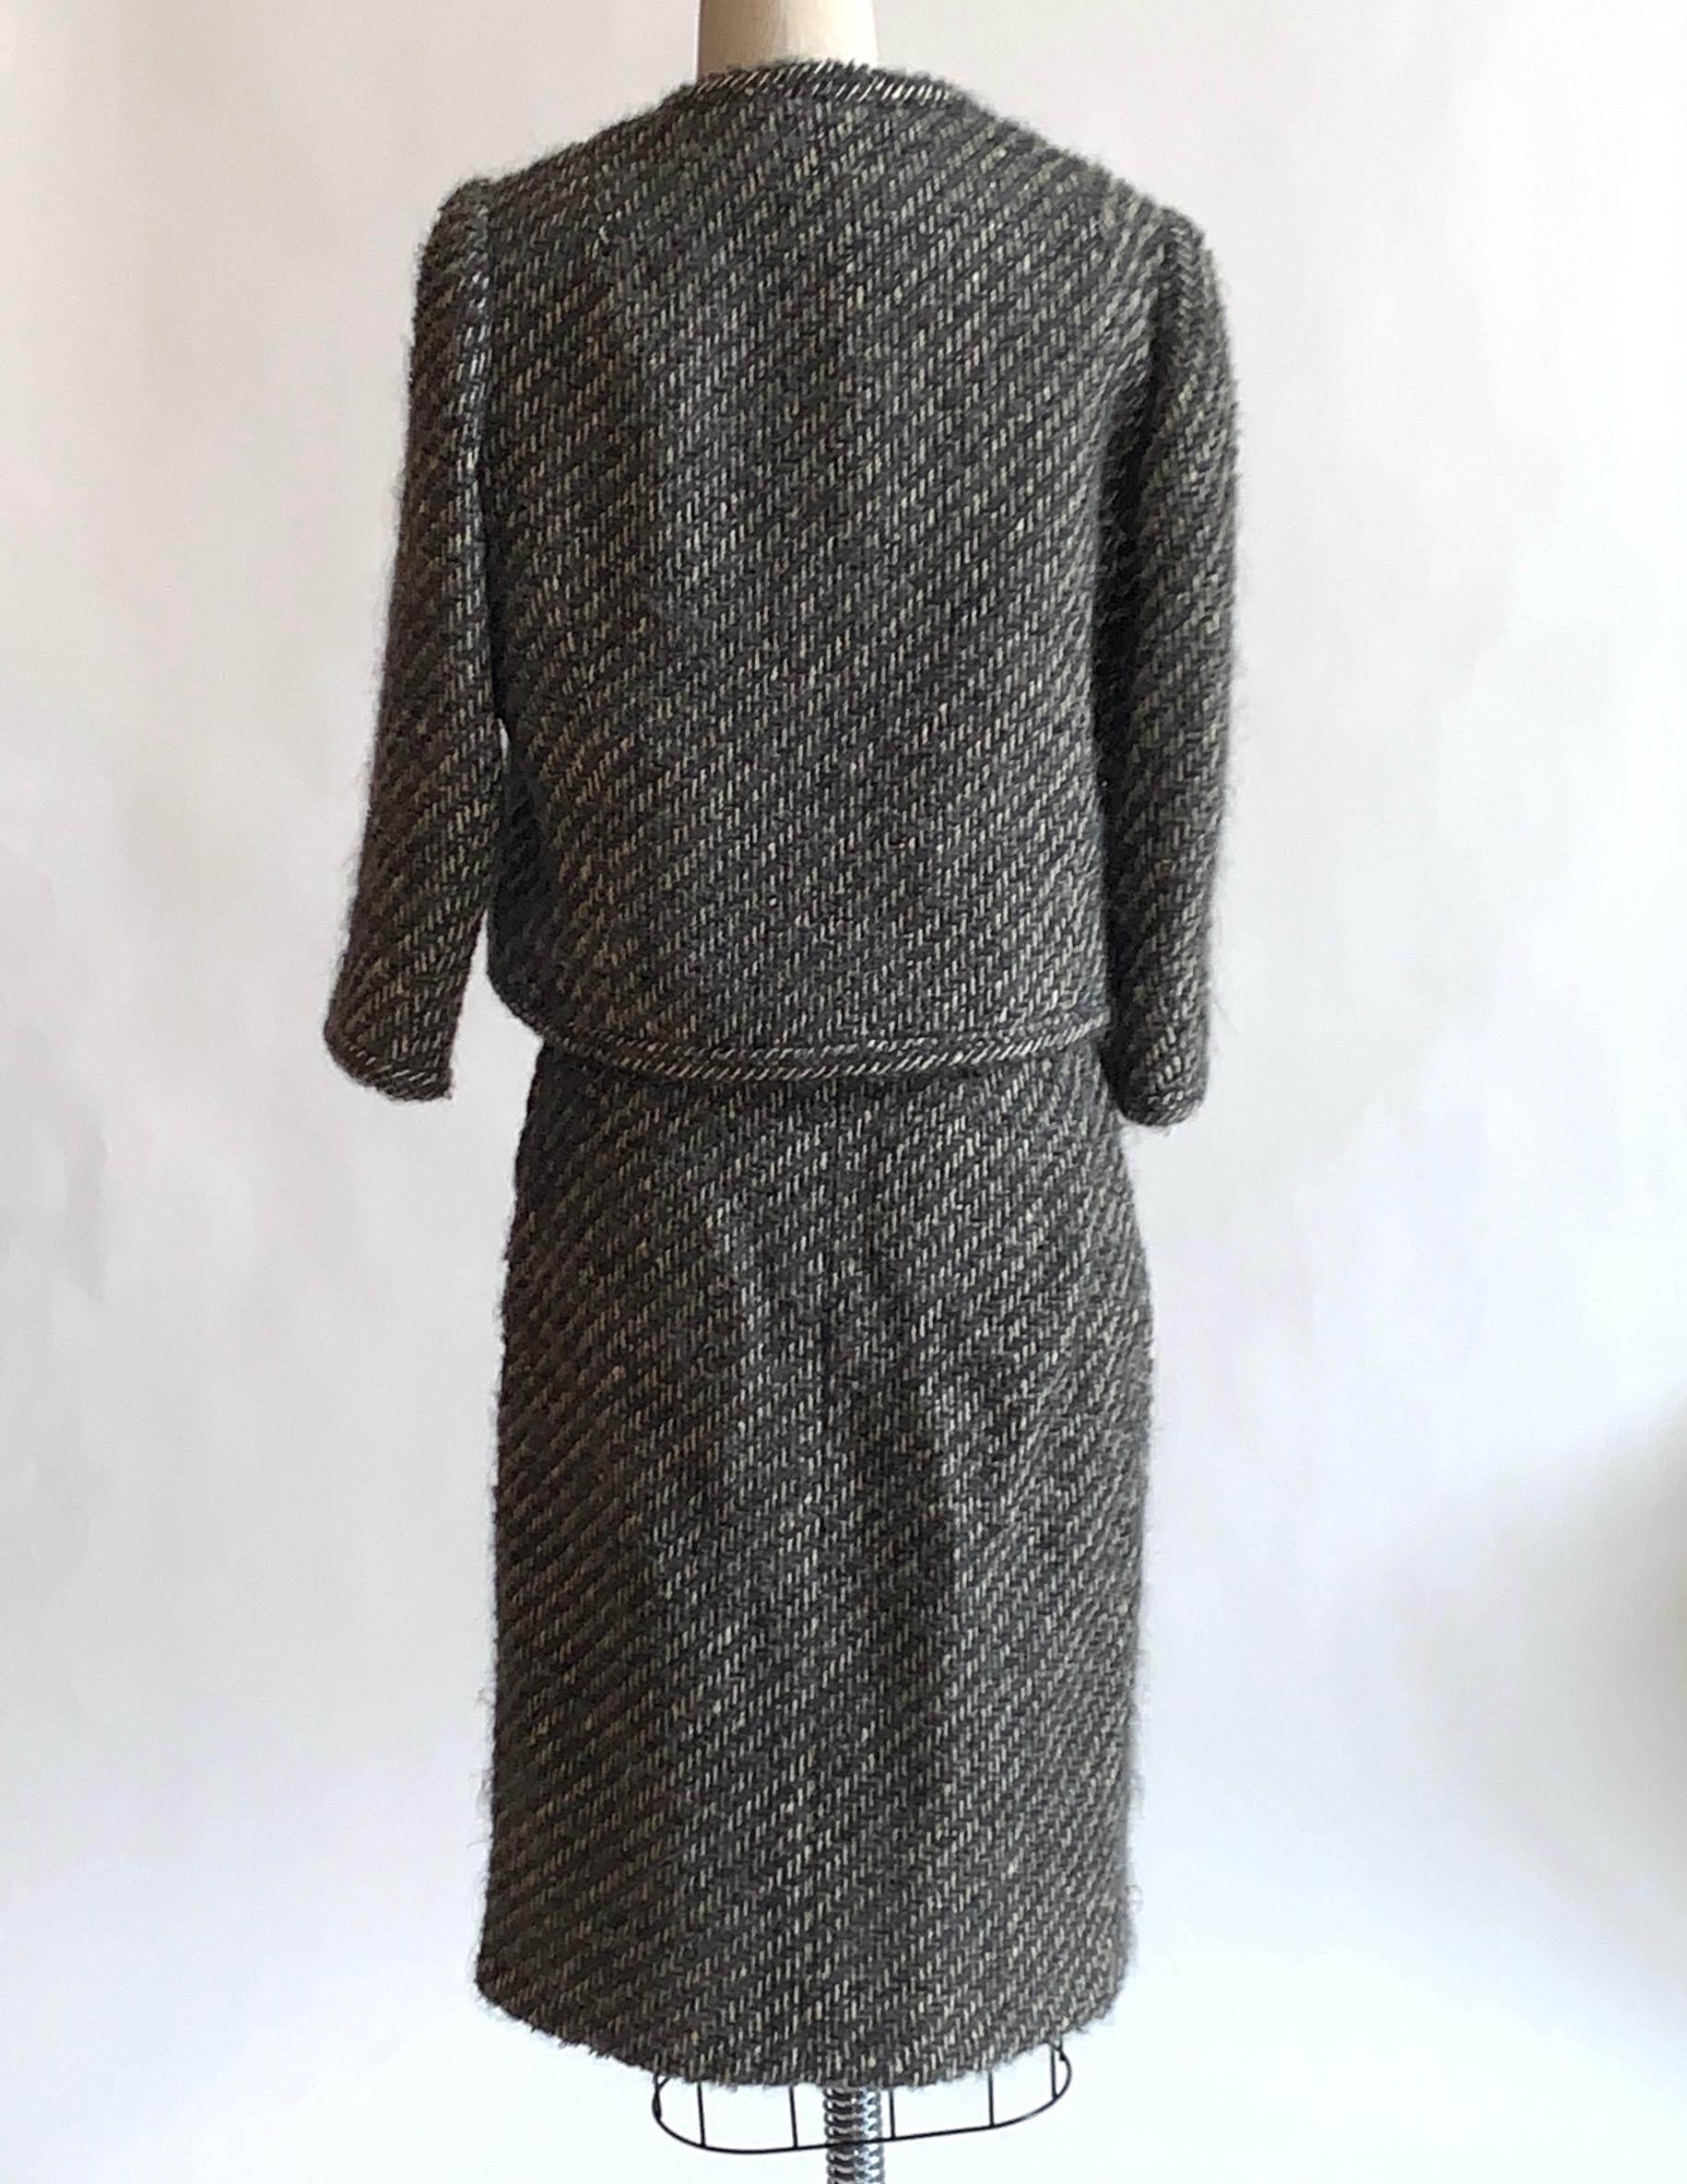 Sophie of Saks Sophie Gimbel Grey 1960s Skirt Suit in Grey and White Fuzzy Weave In Good Condition For Sale In San Francisco, CA